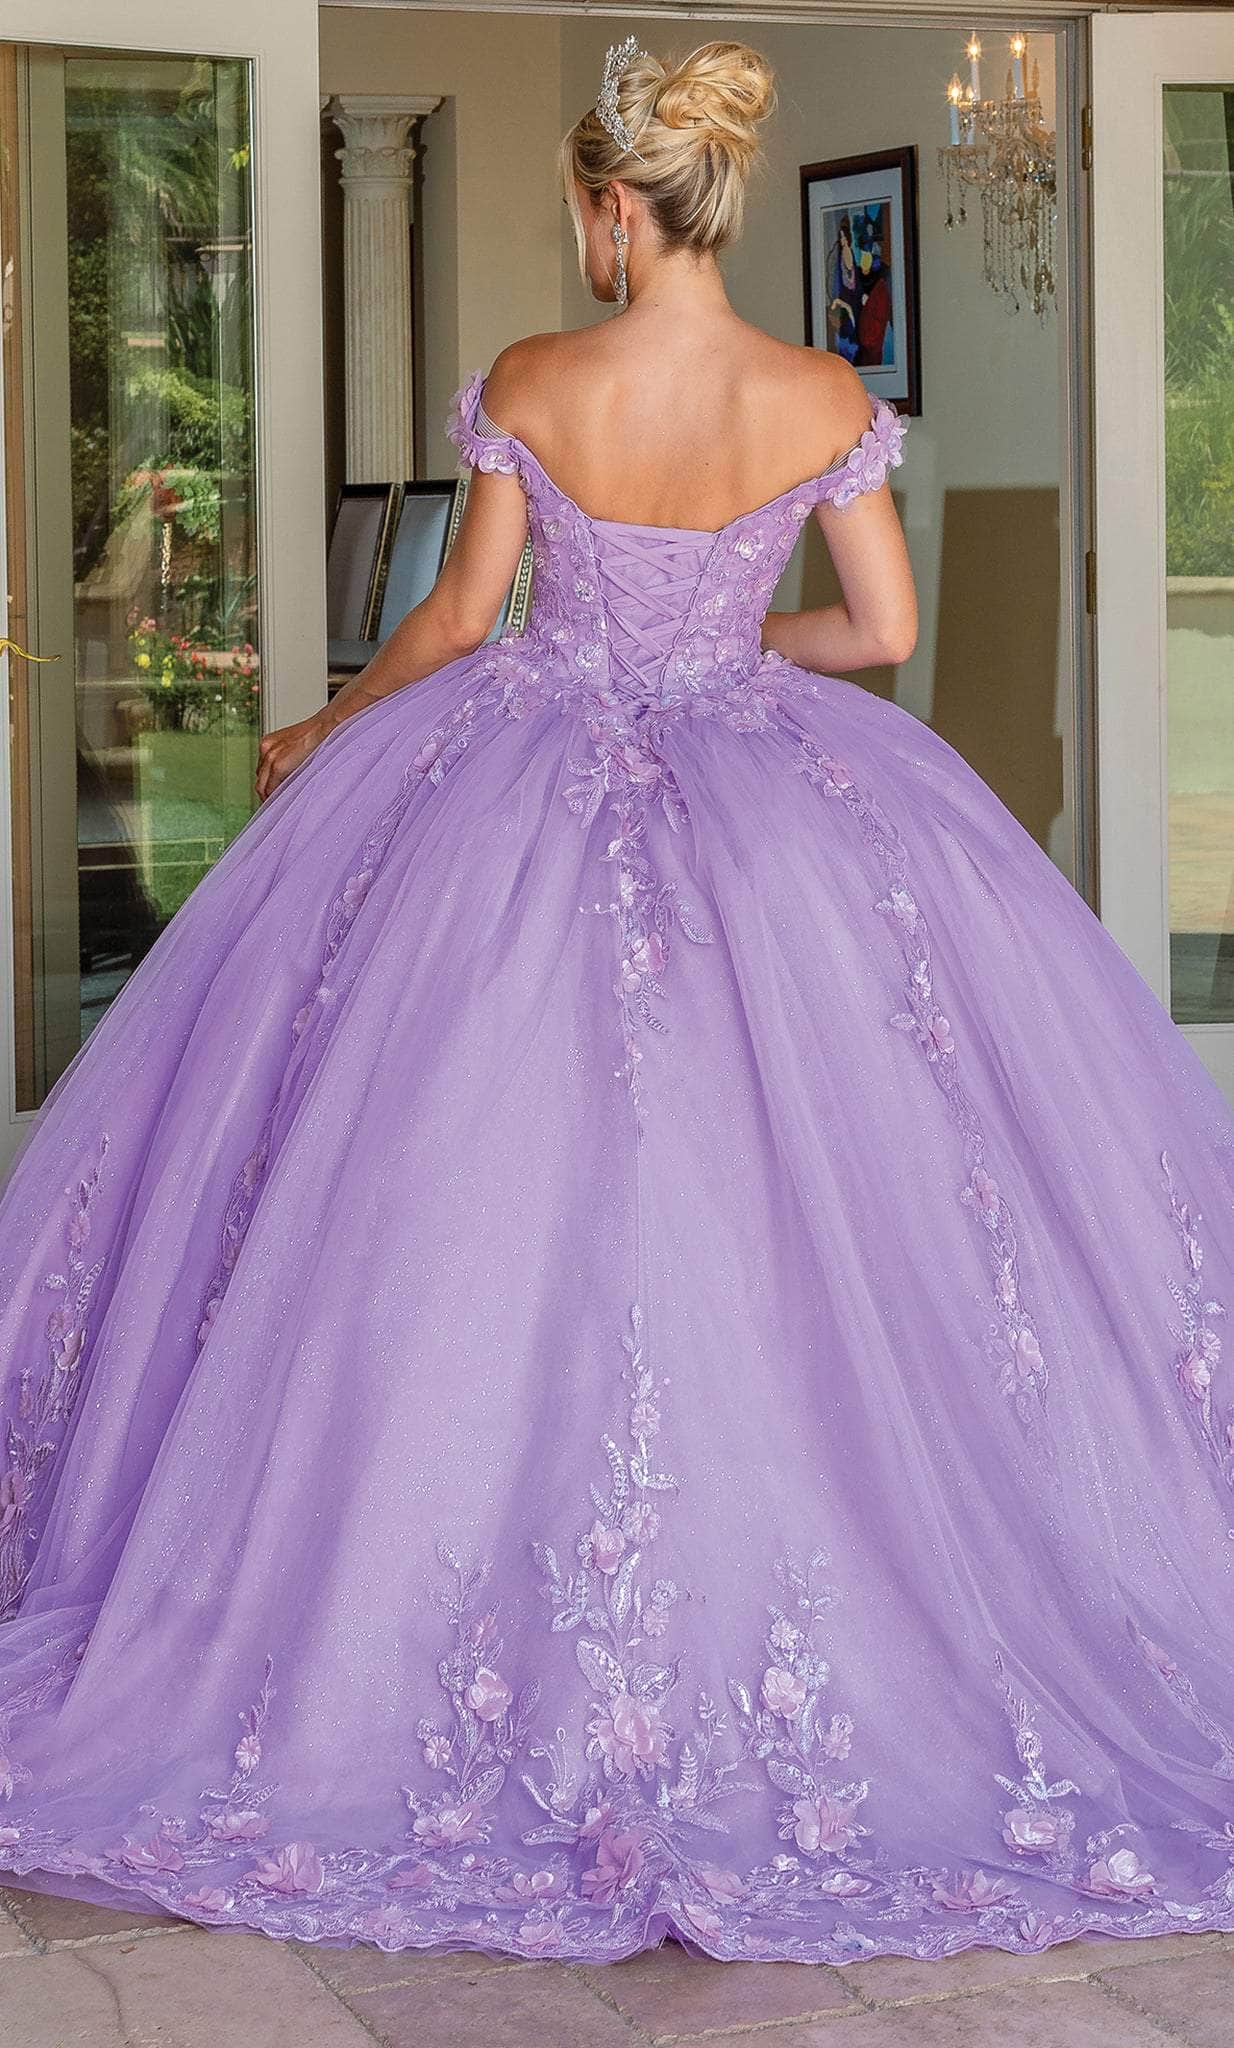 Dancing Queen 1698 - Embellished Quinceanera Ballgown Ball Gowns